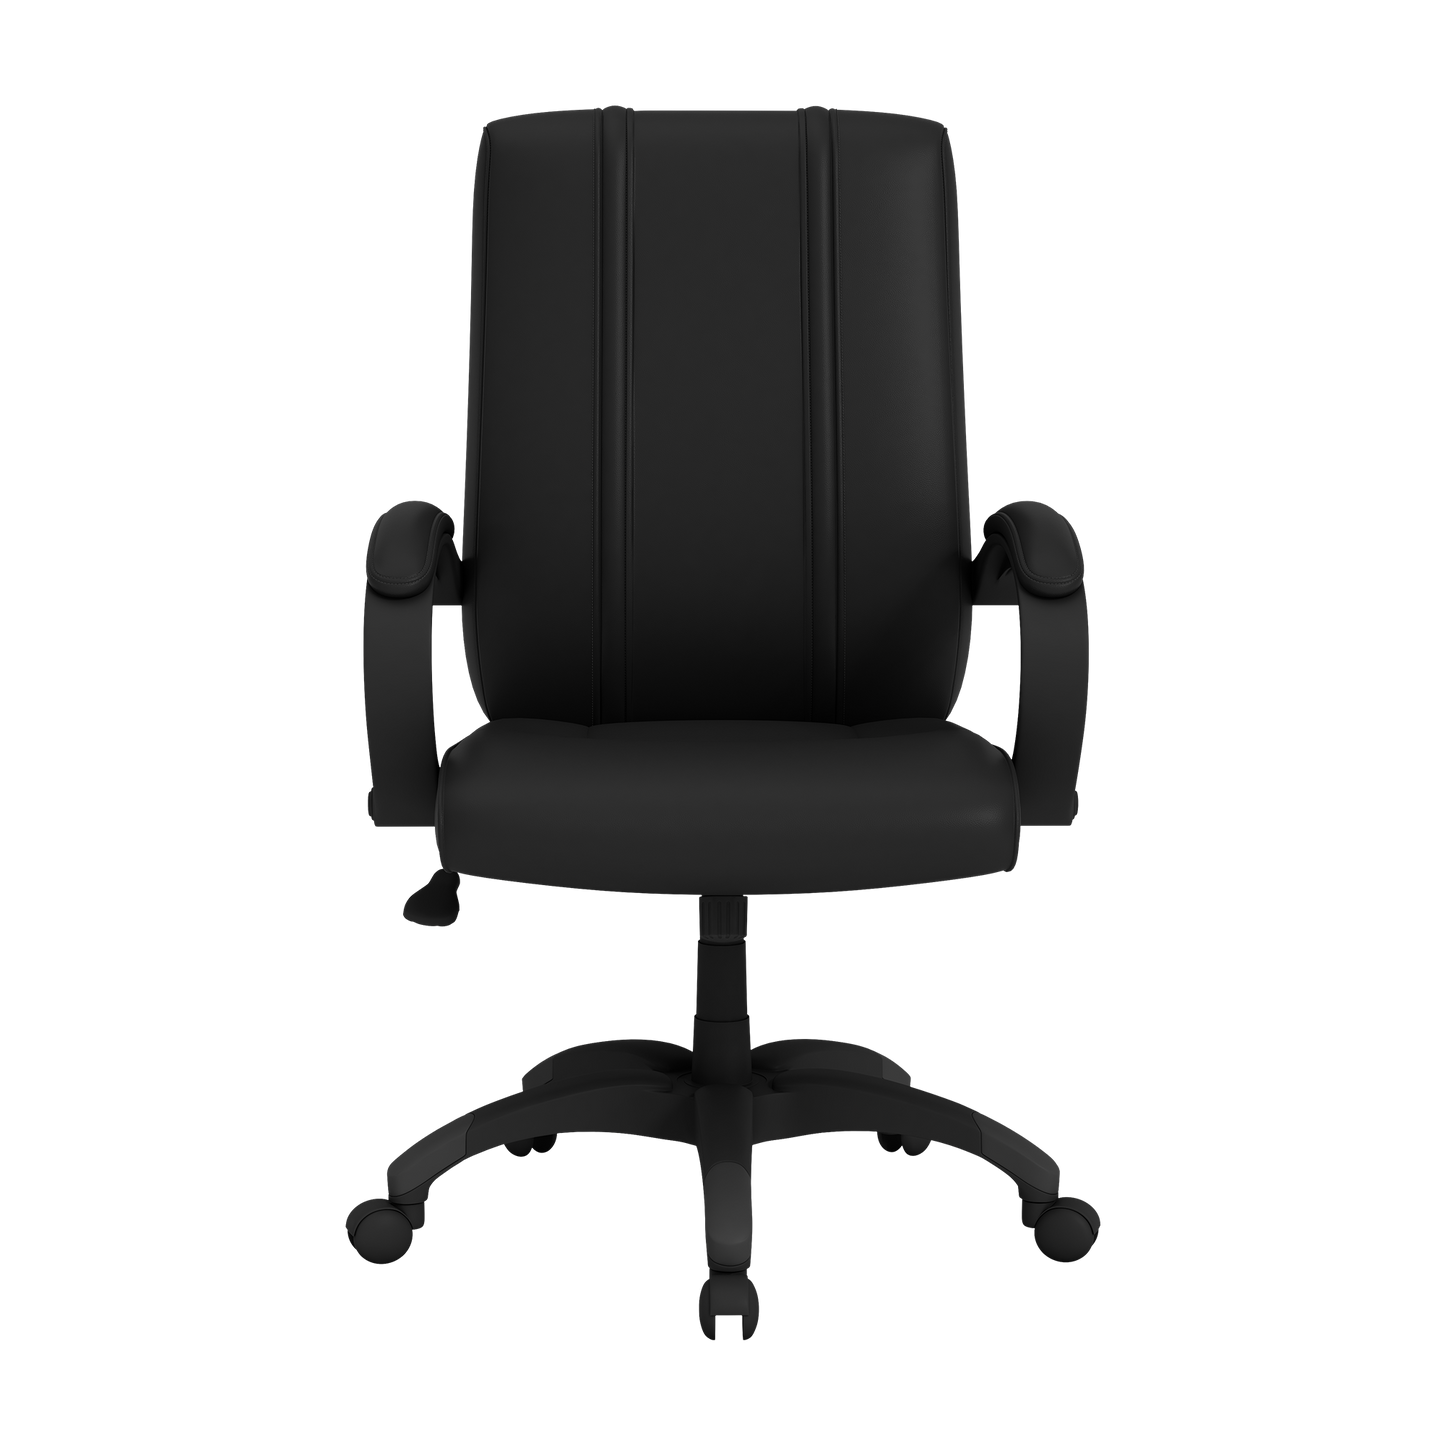 Office Chair 1000 with Calgary Flames Logo